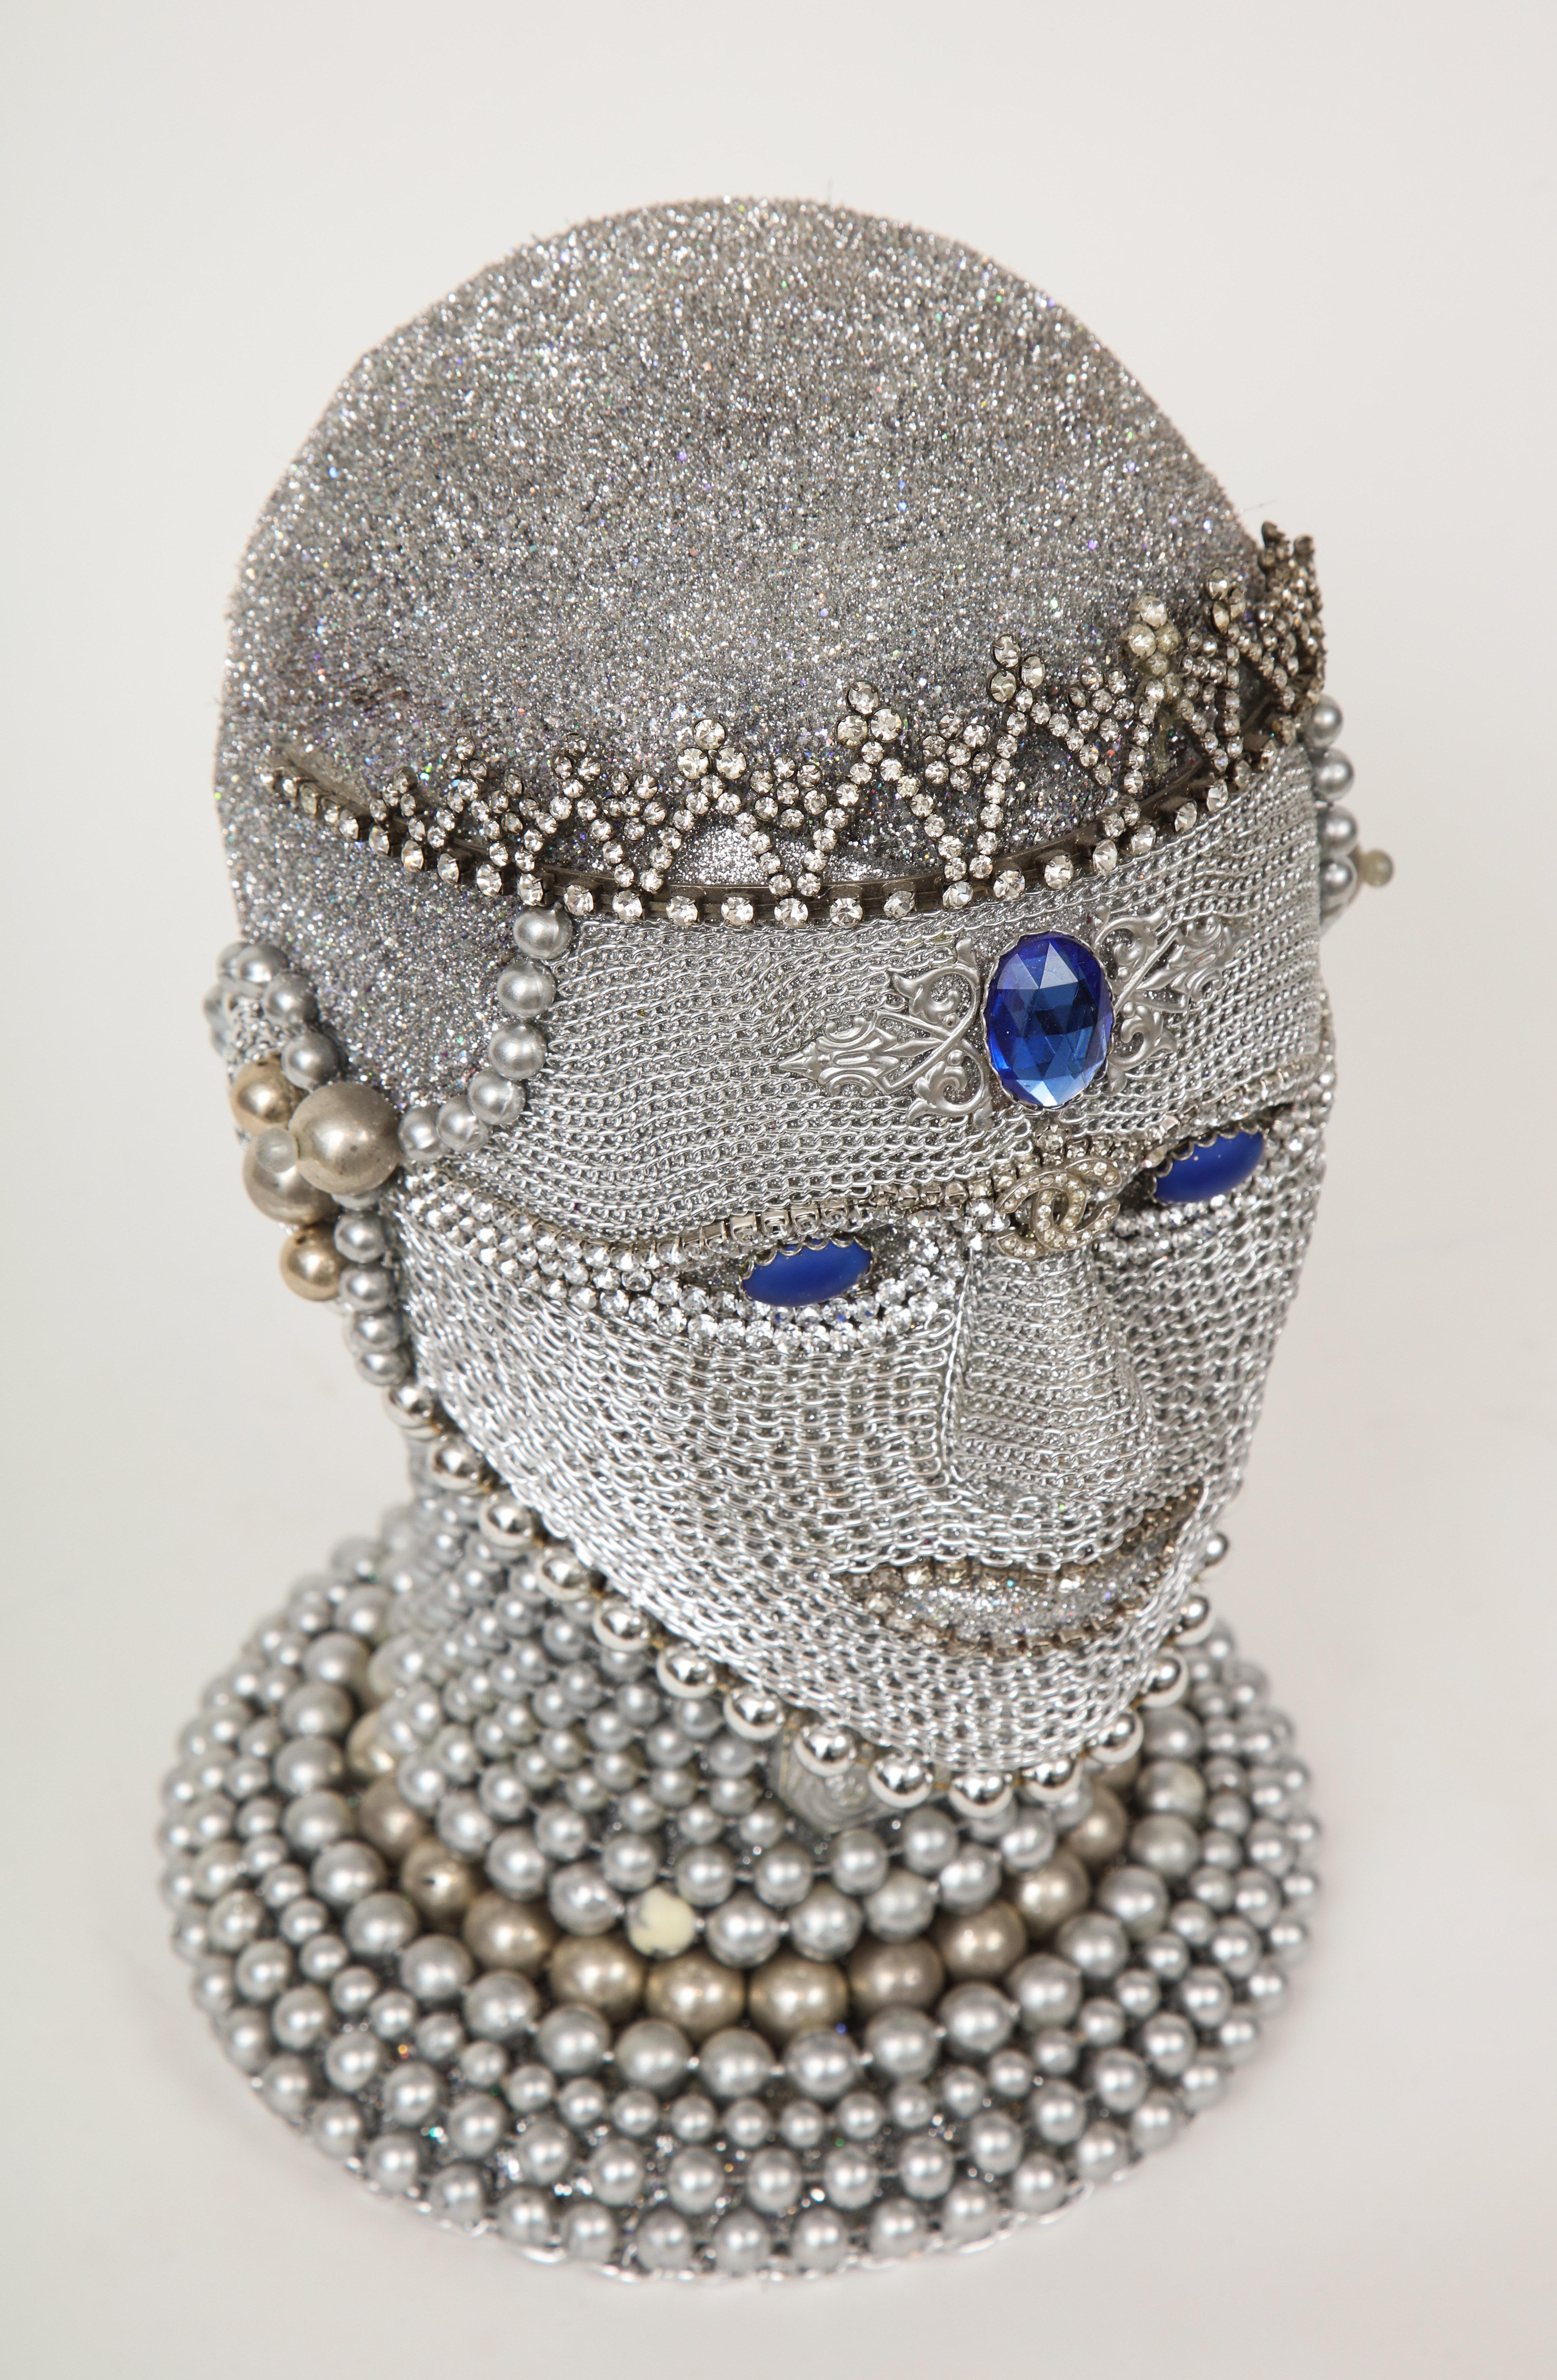 American W. Beaupre Chain Mail Bust For Sale